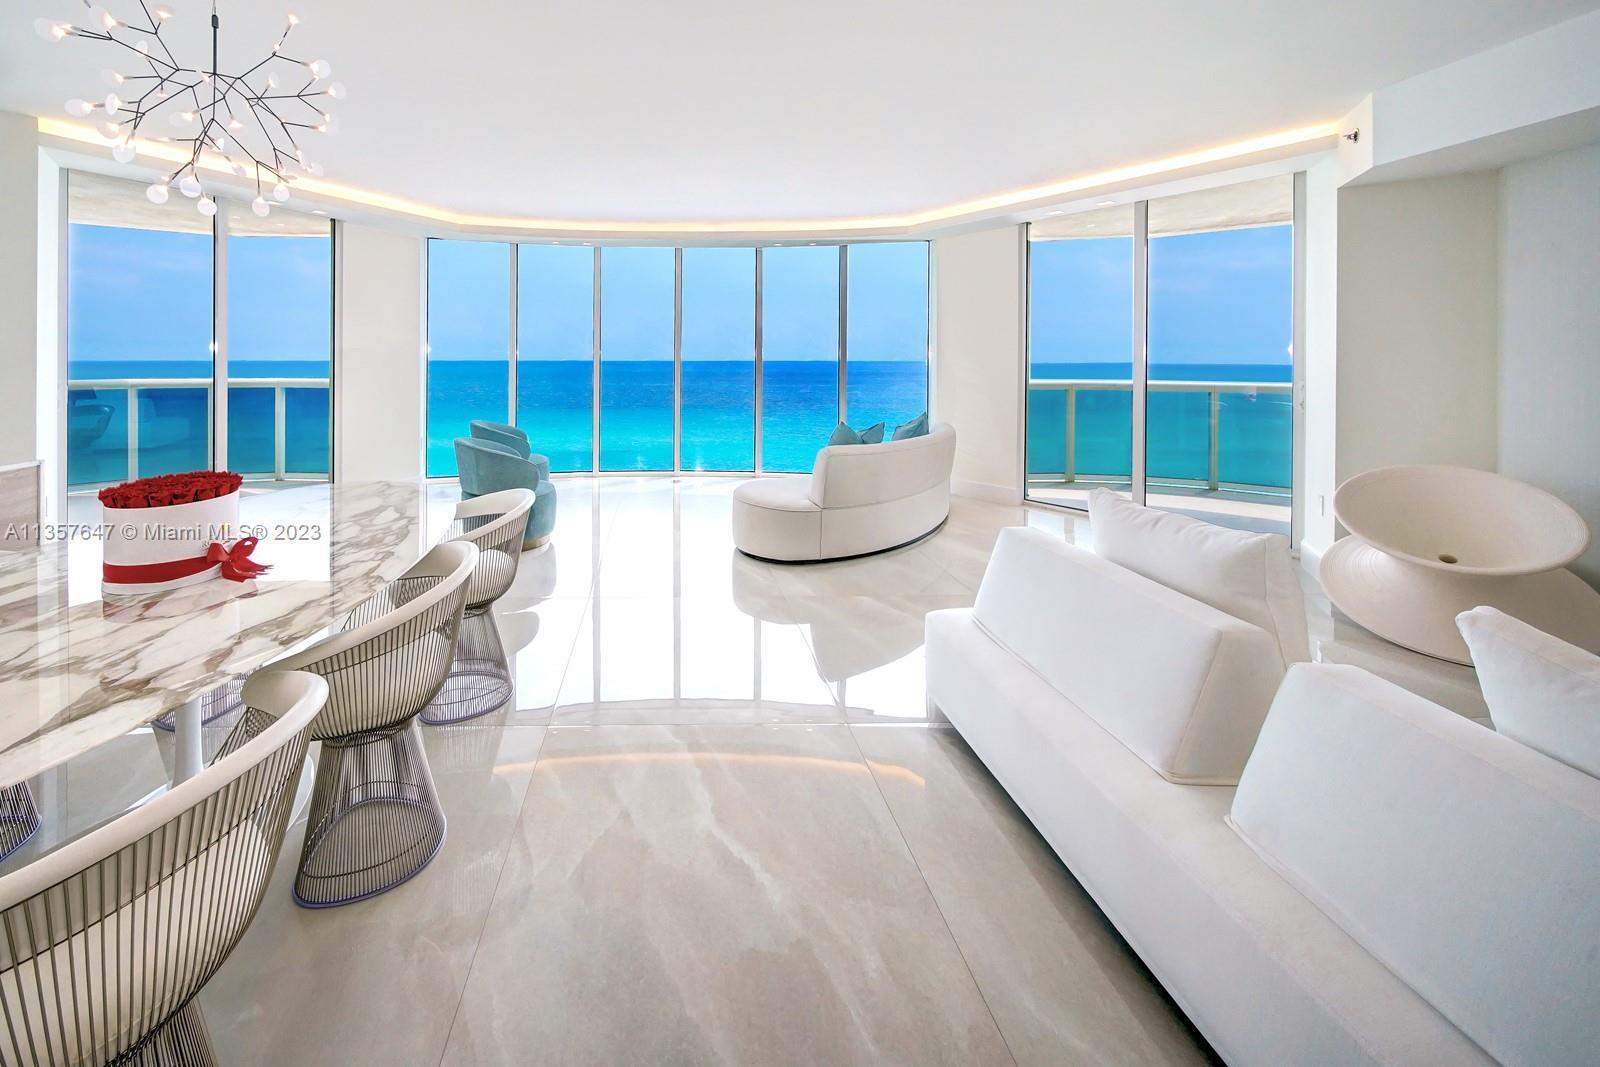 Ocean Four Condo in Sunny Isles Beach: Elegantly finished, this beautiful unit with breathtaking dir